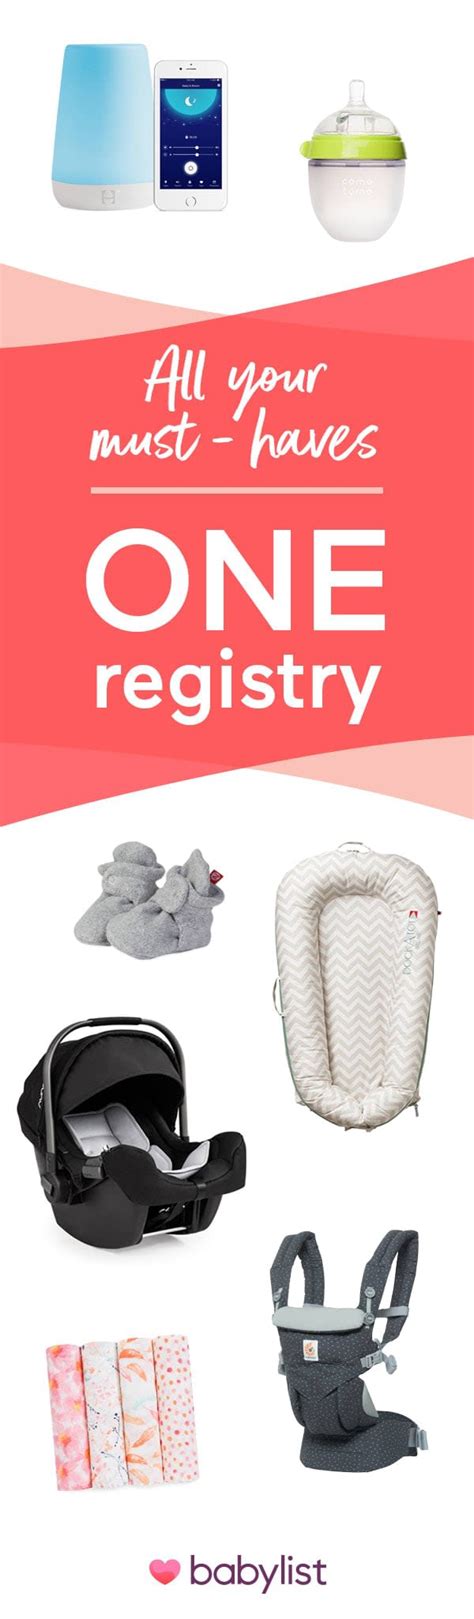 Babylist com registry. We saved you a seat. ... babylist-logo. Baby Registry. Collapsible question closed icon. Create a Babylist · Find a Babylist · Why Babylist ... 